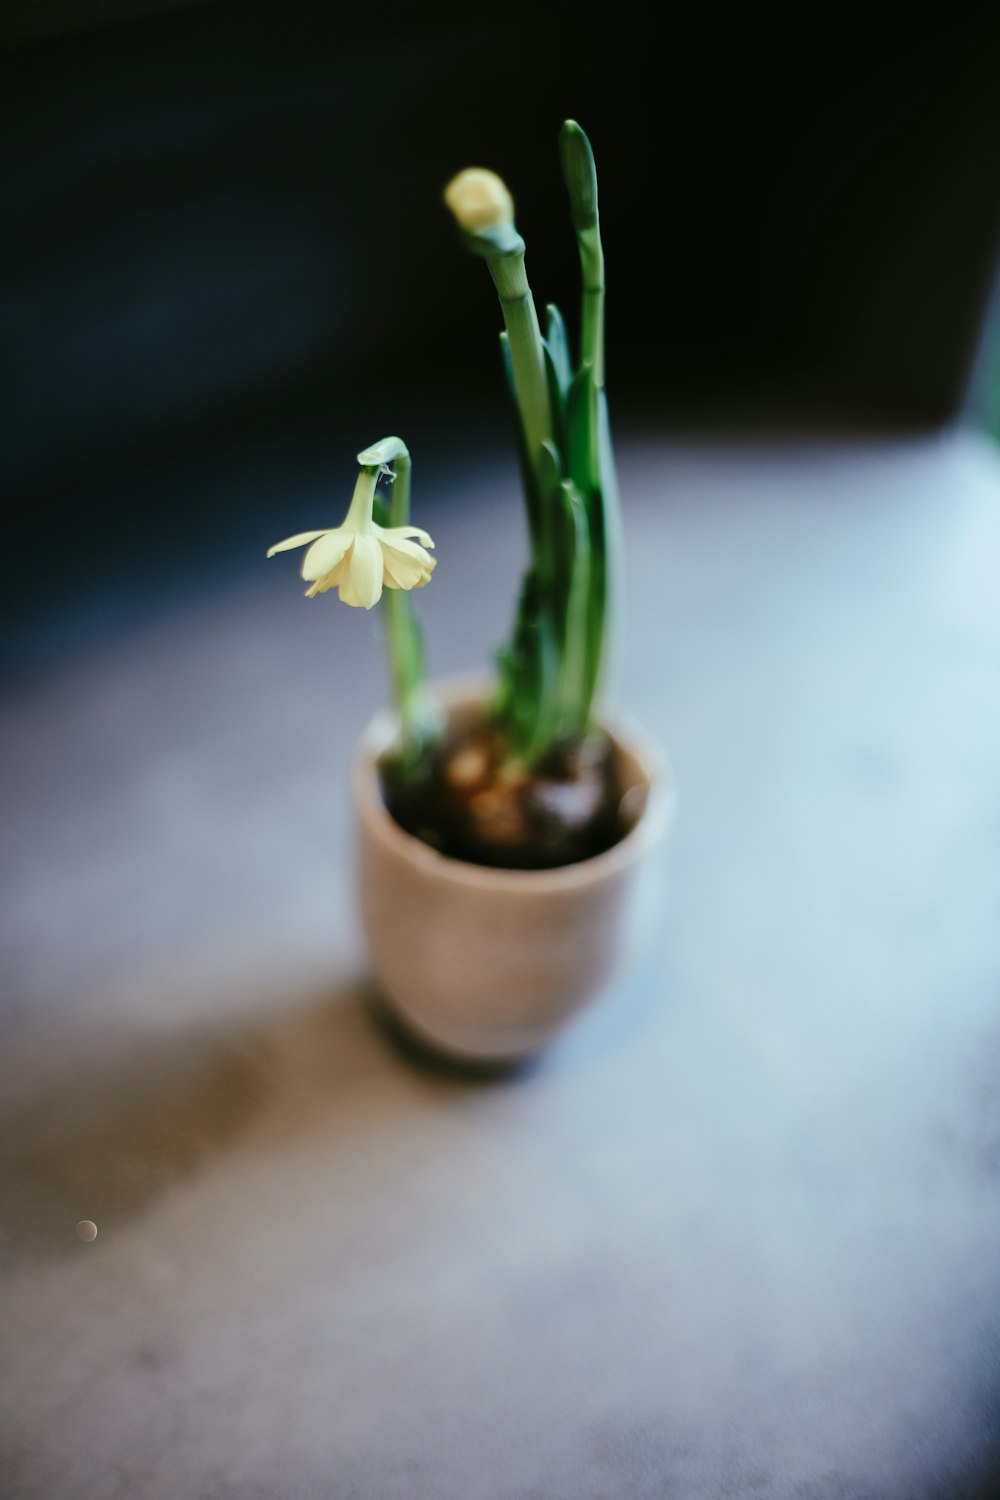 a small potted plant sitting on a table